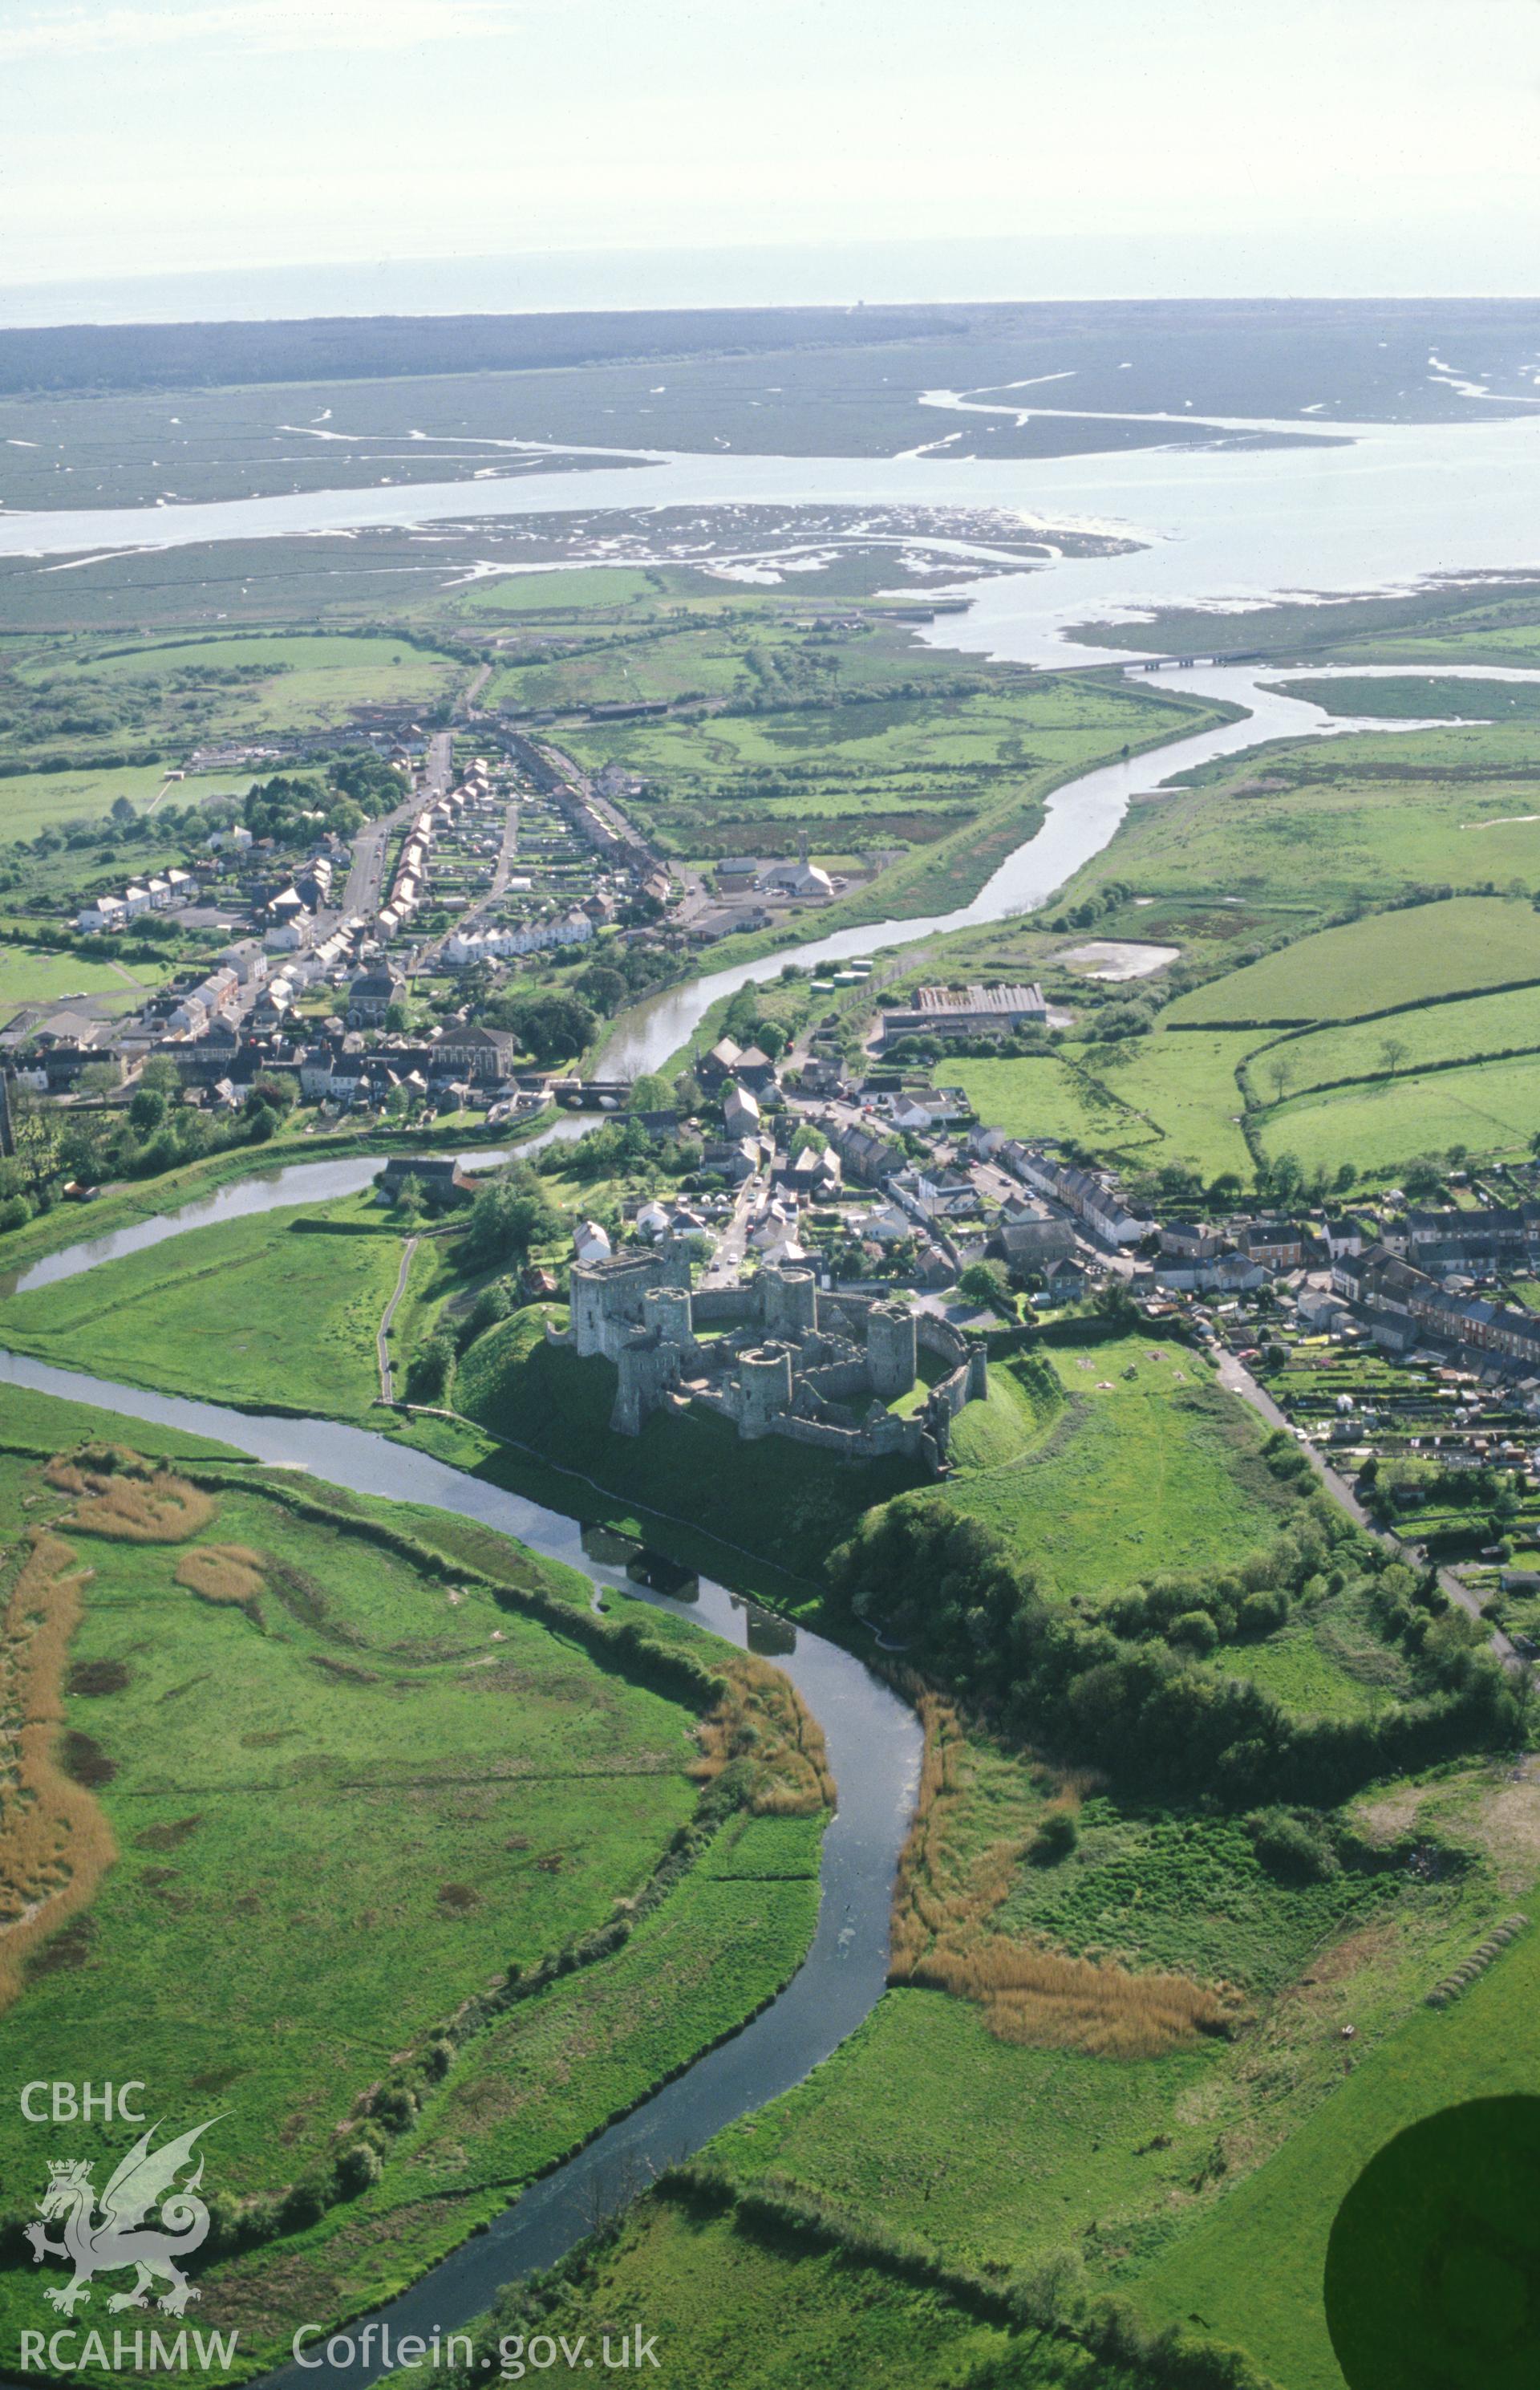 Slide of RCAHMW colour oblique aerial photograph of Kidwelly Town, taken by C.R. Musson, 18/5/1989.